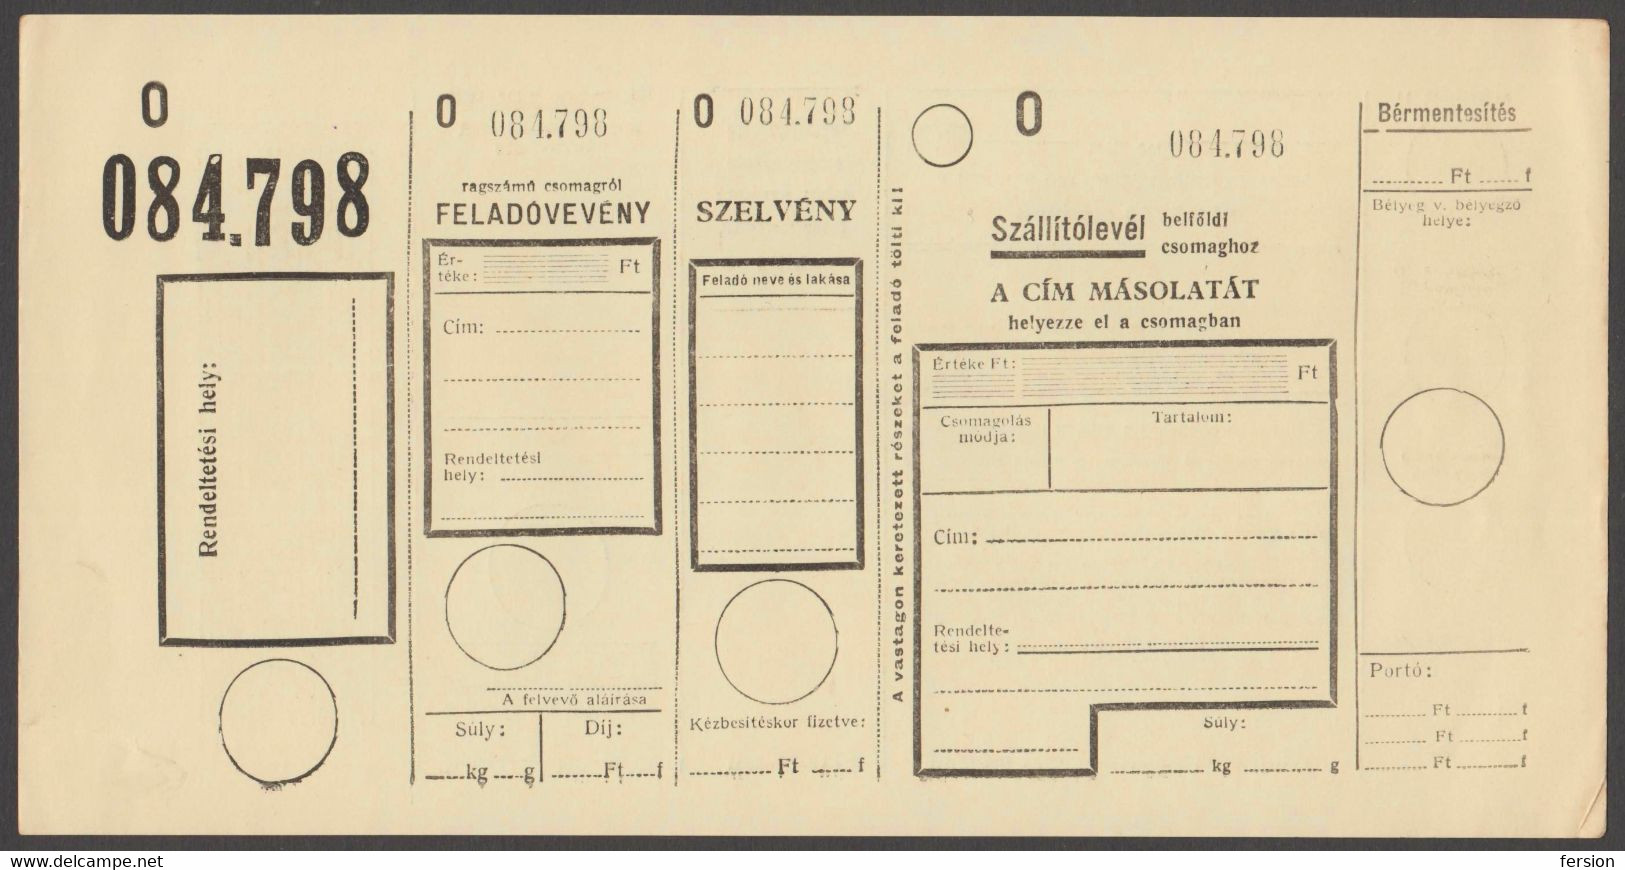 Post Office - POST OFFICE / "O" PACKET Inland / HUNGARY 1960's - Parcel Post Postal Stationery Form - Paketmarken